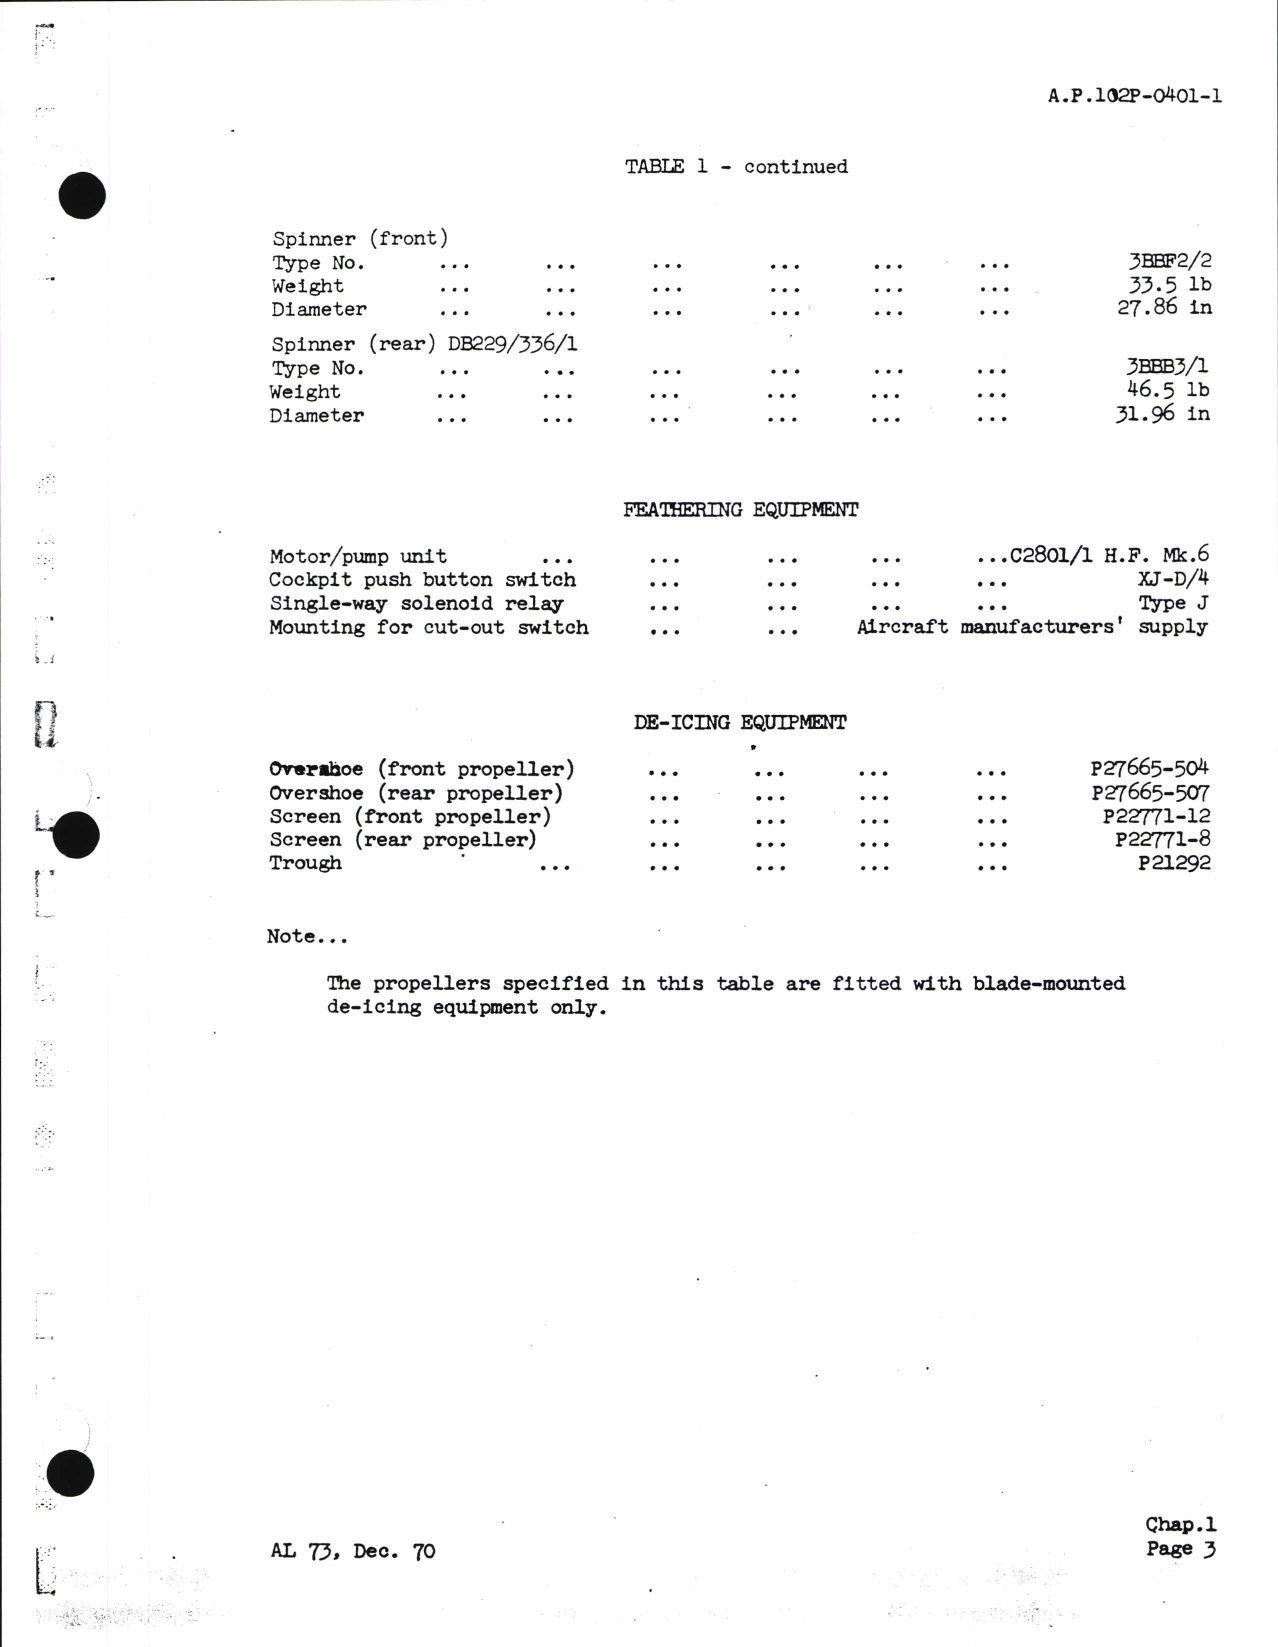 Sample page 8 from AirCorps Library document: Propeller Types DF 178/334/1,/2 and DB299/336/1 For Shackleton Aircraft